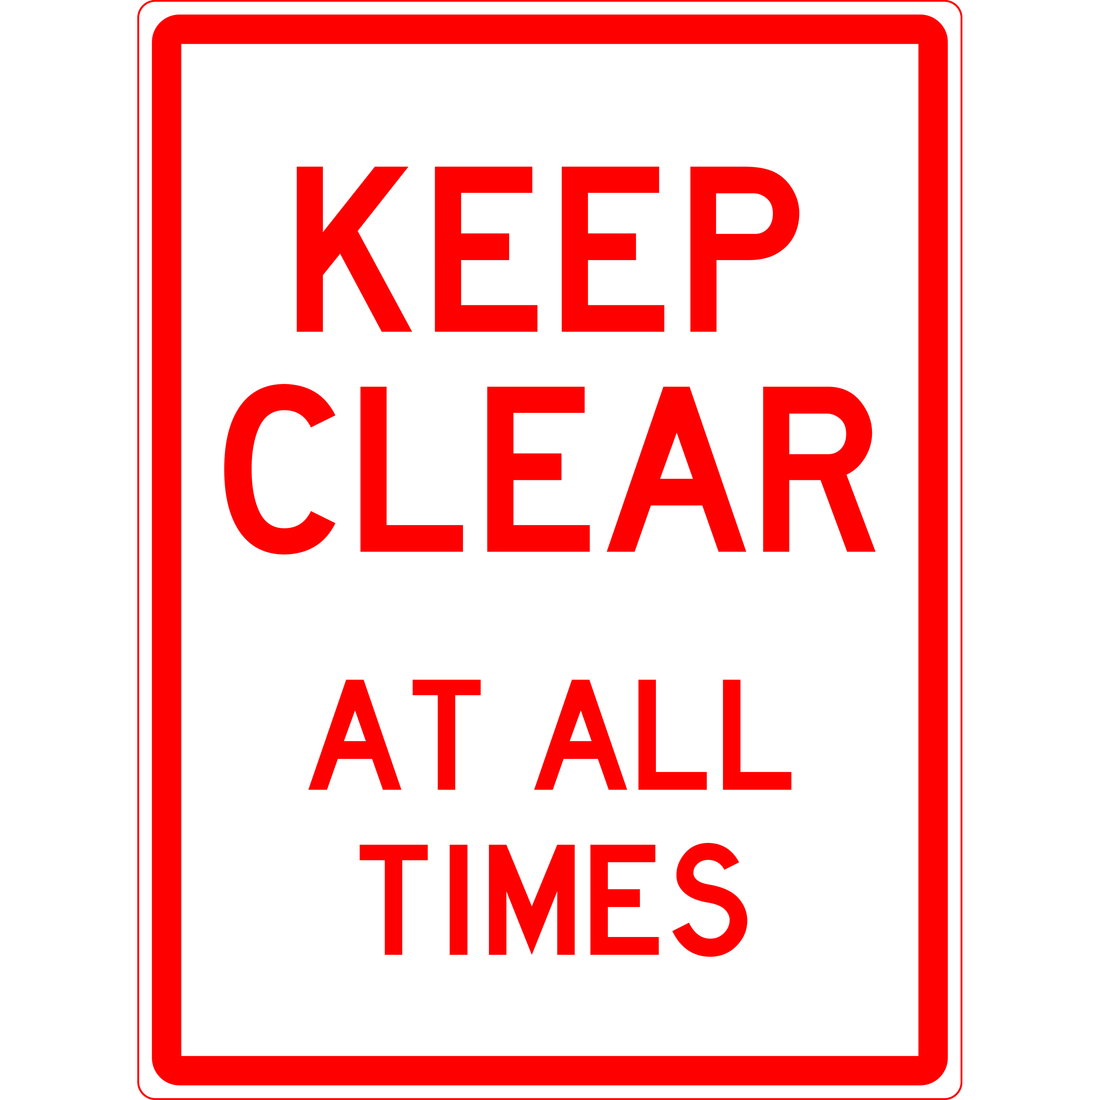 CARPARK-KEEP-CLEAR-AT-ALL-TIMES